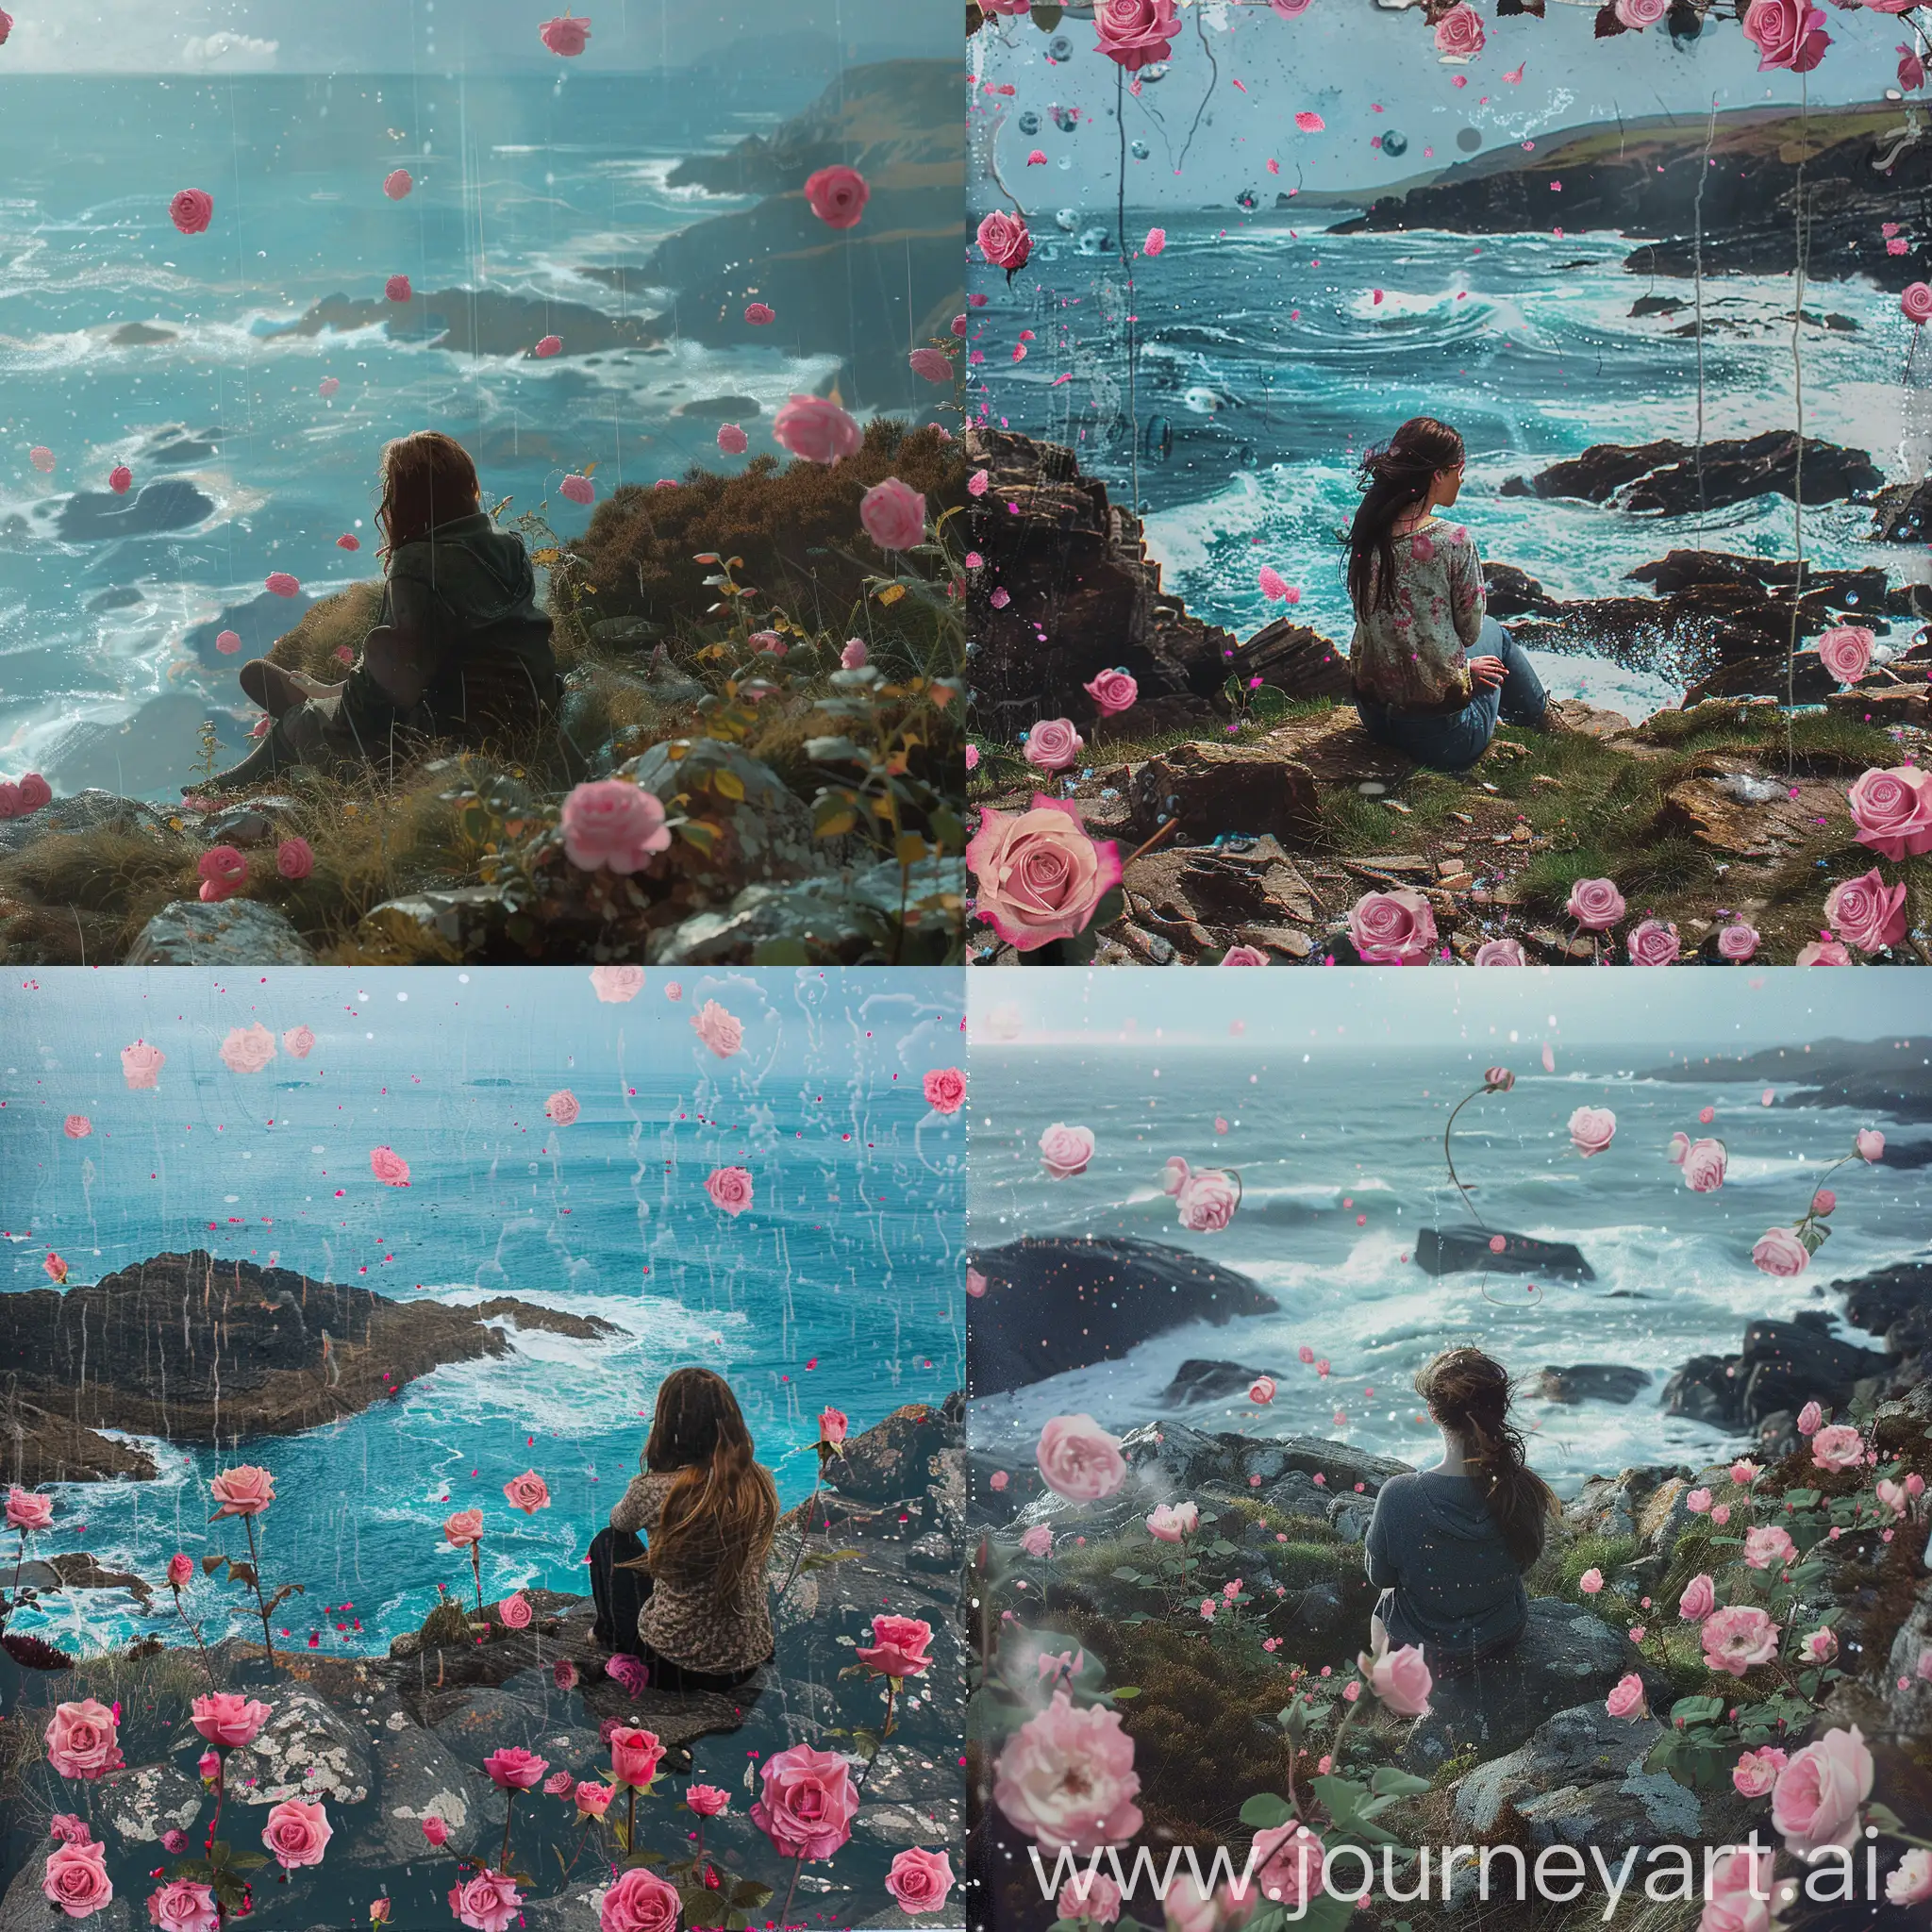 It's a rainy day in Scotland but the sun is shining, a woman is sitting on a rocky hill looking out to sea, the sea is blue but choppy, foamy waves are crashing on the rocks, the woman is pensive, sad and lonely but she has a proud and accepting expression. pink roses are everywhere around her